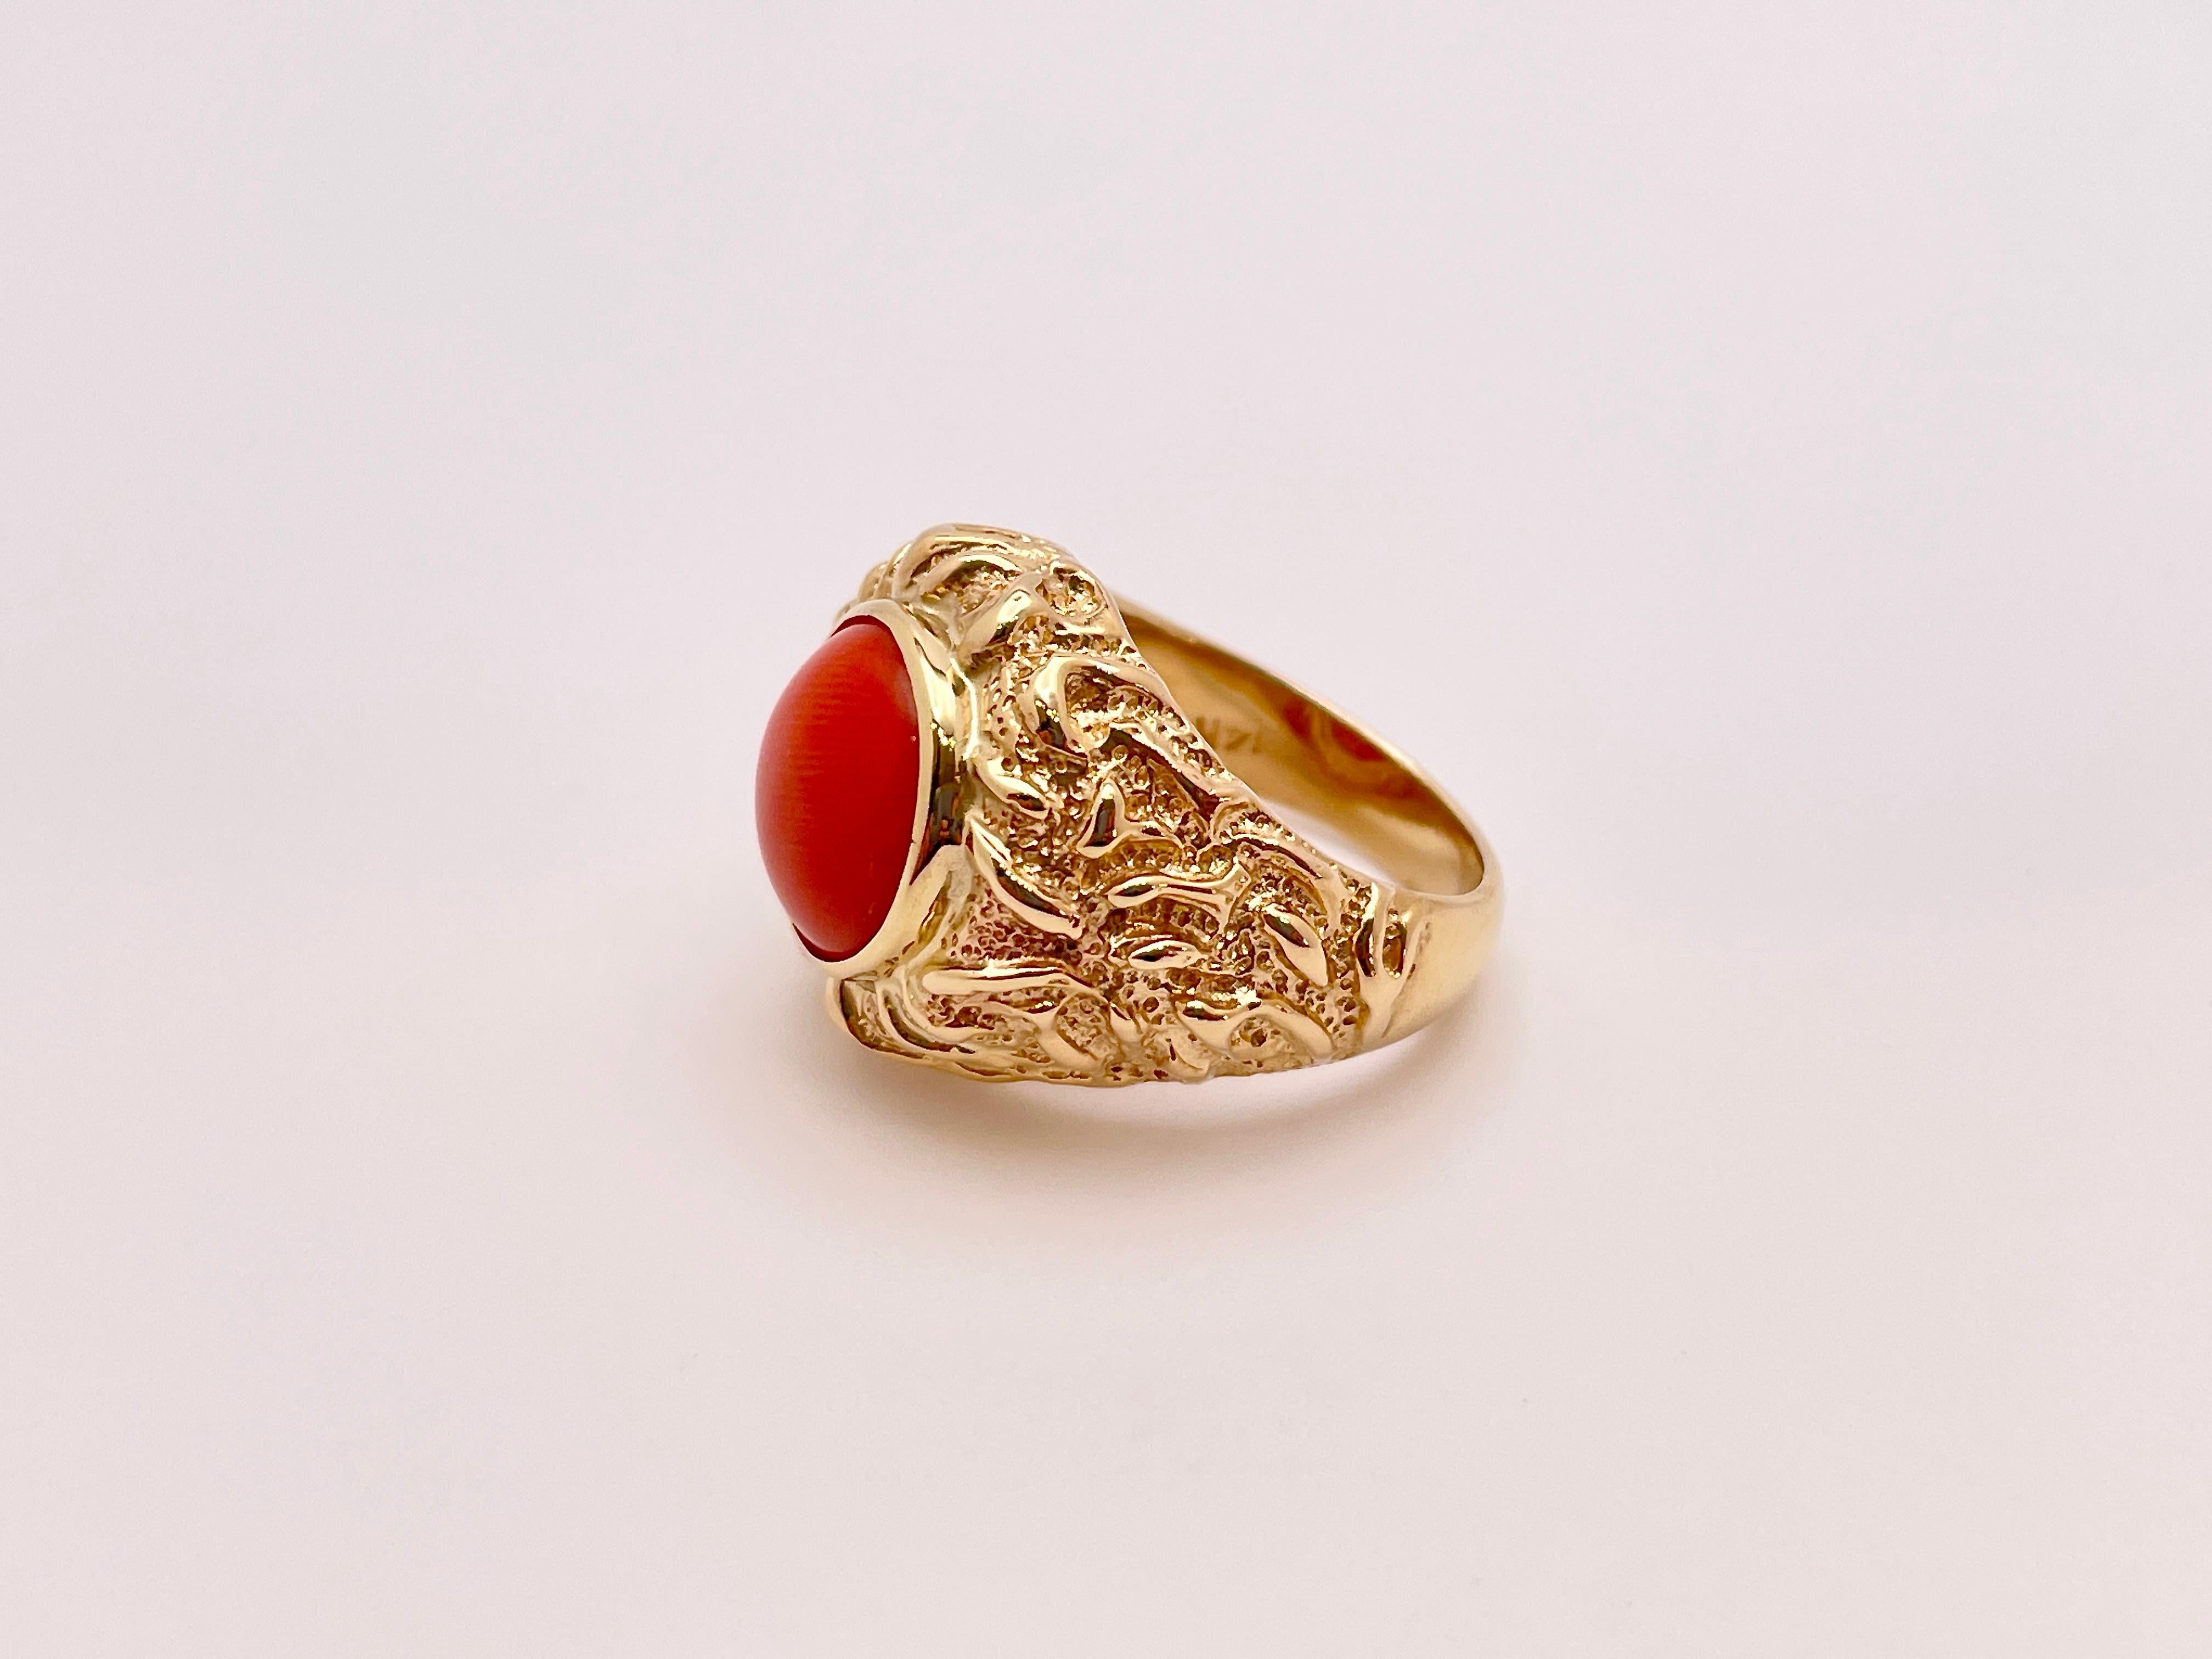 An original 14K handmade coral ring. Centered with one round double-sided cabochon natural orange color coral weighing 8-10 CT, measuring approximately 12.50 mm in diameter and 7.20 mm in depth.

Gross Weight: 13.70 Grams
Ring Size: 7.25 US (Sizable)